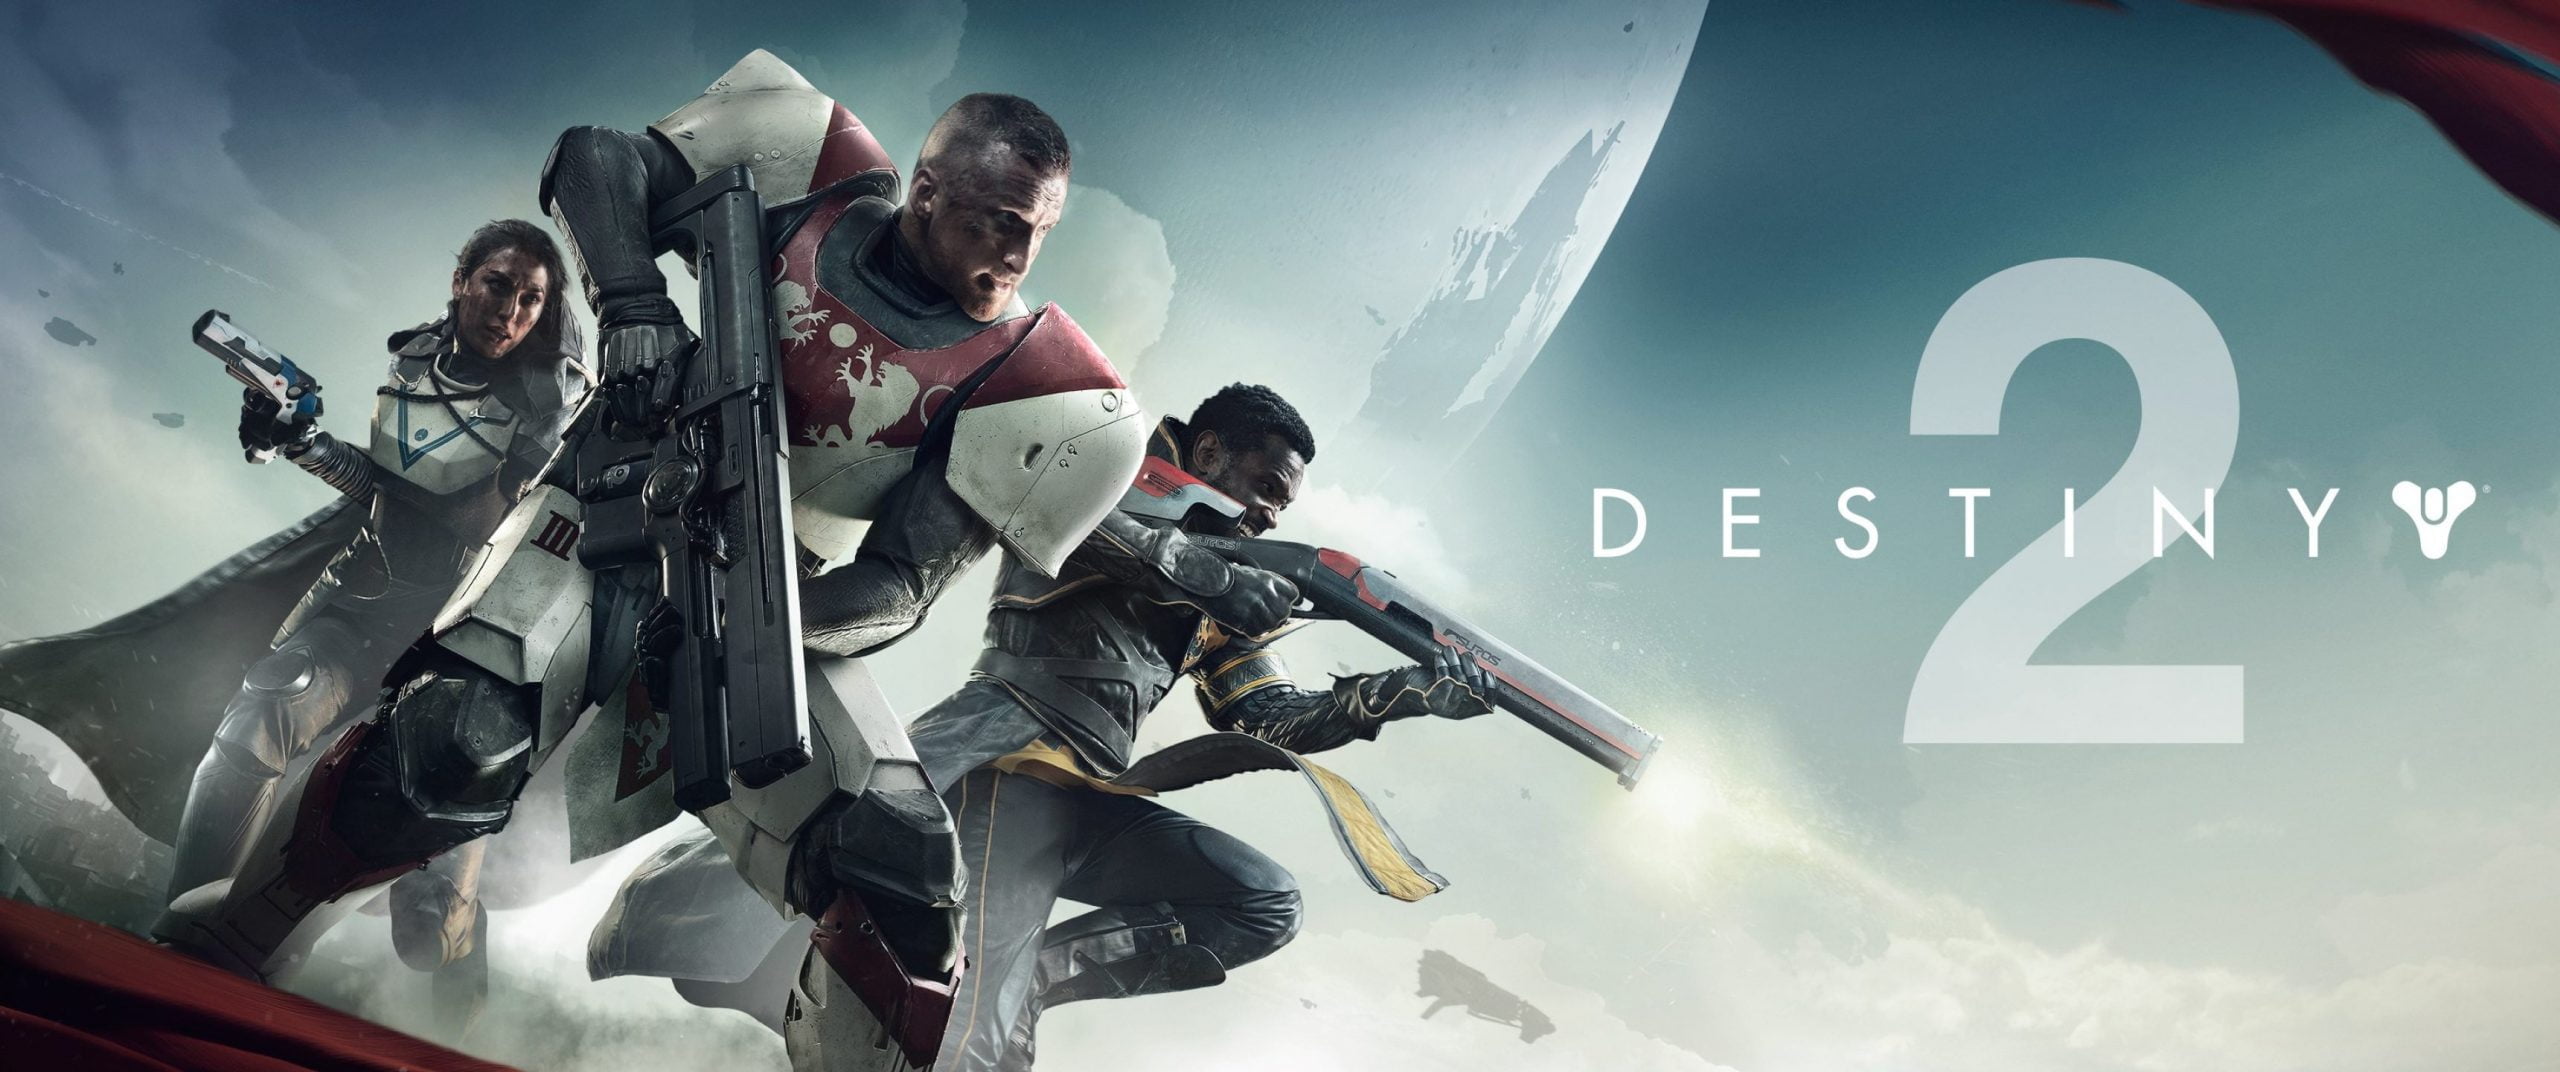 Destiny 2 Physical Copy Owners Enabled to Start Playing Right Away